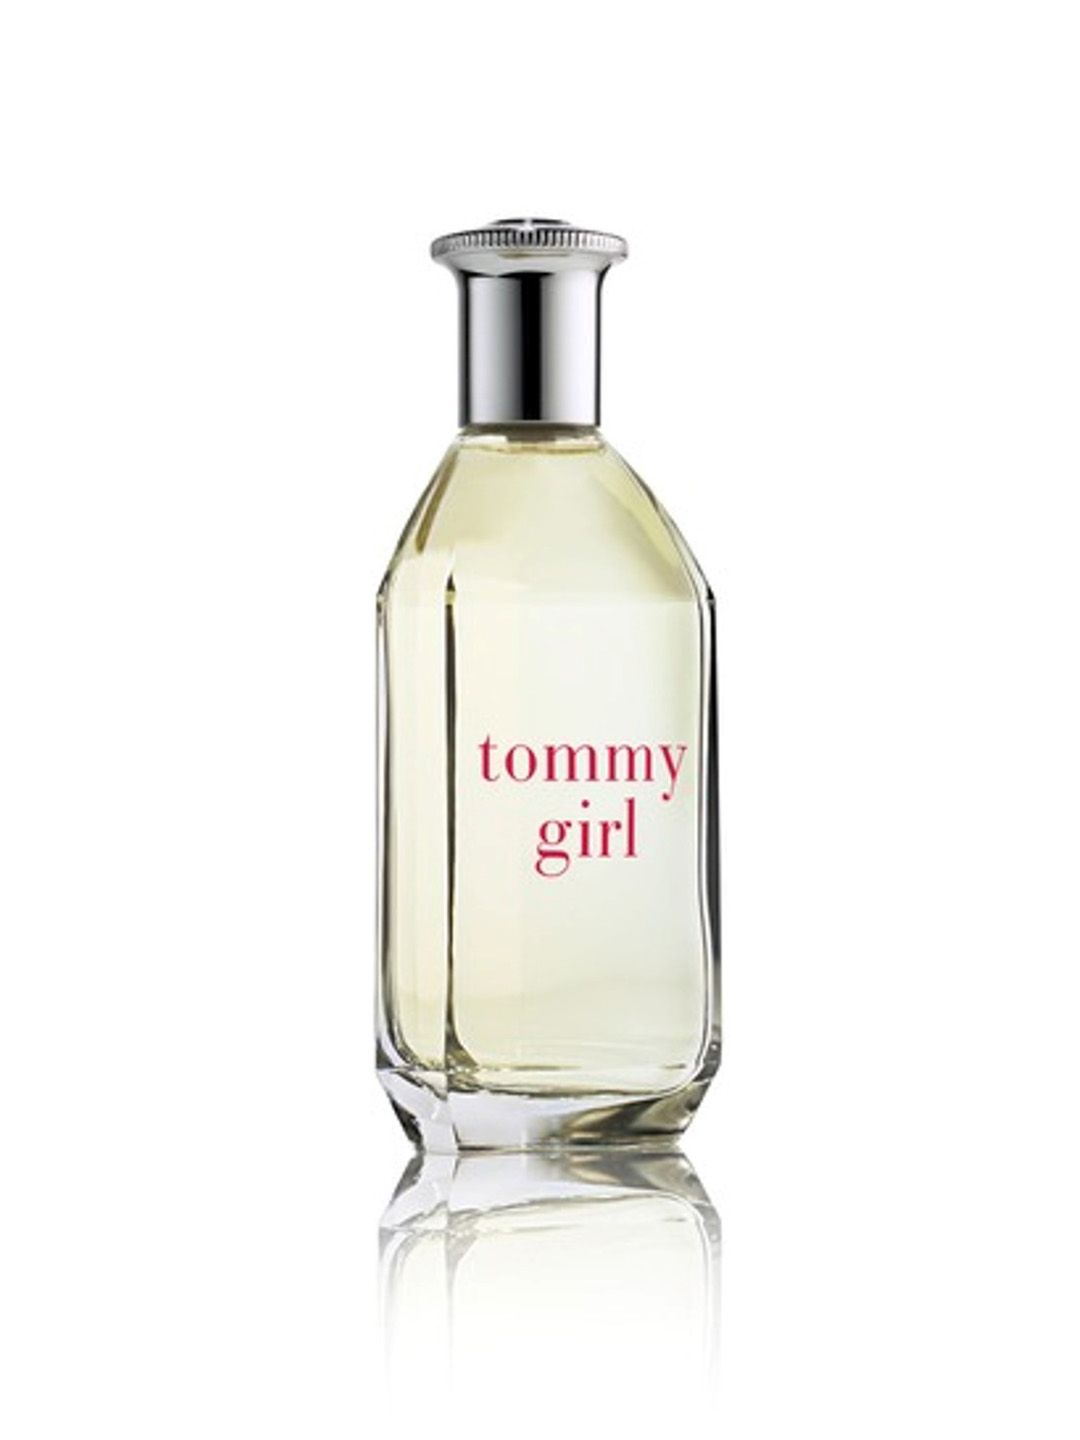 Tommy Hilfiger Girl Cologne Spray 100 ml Price in India